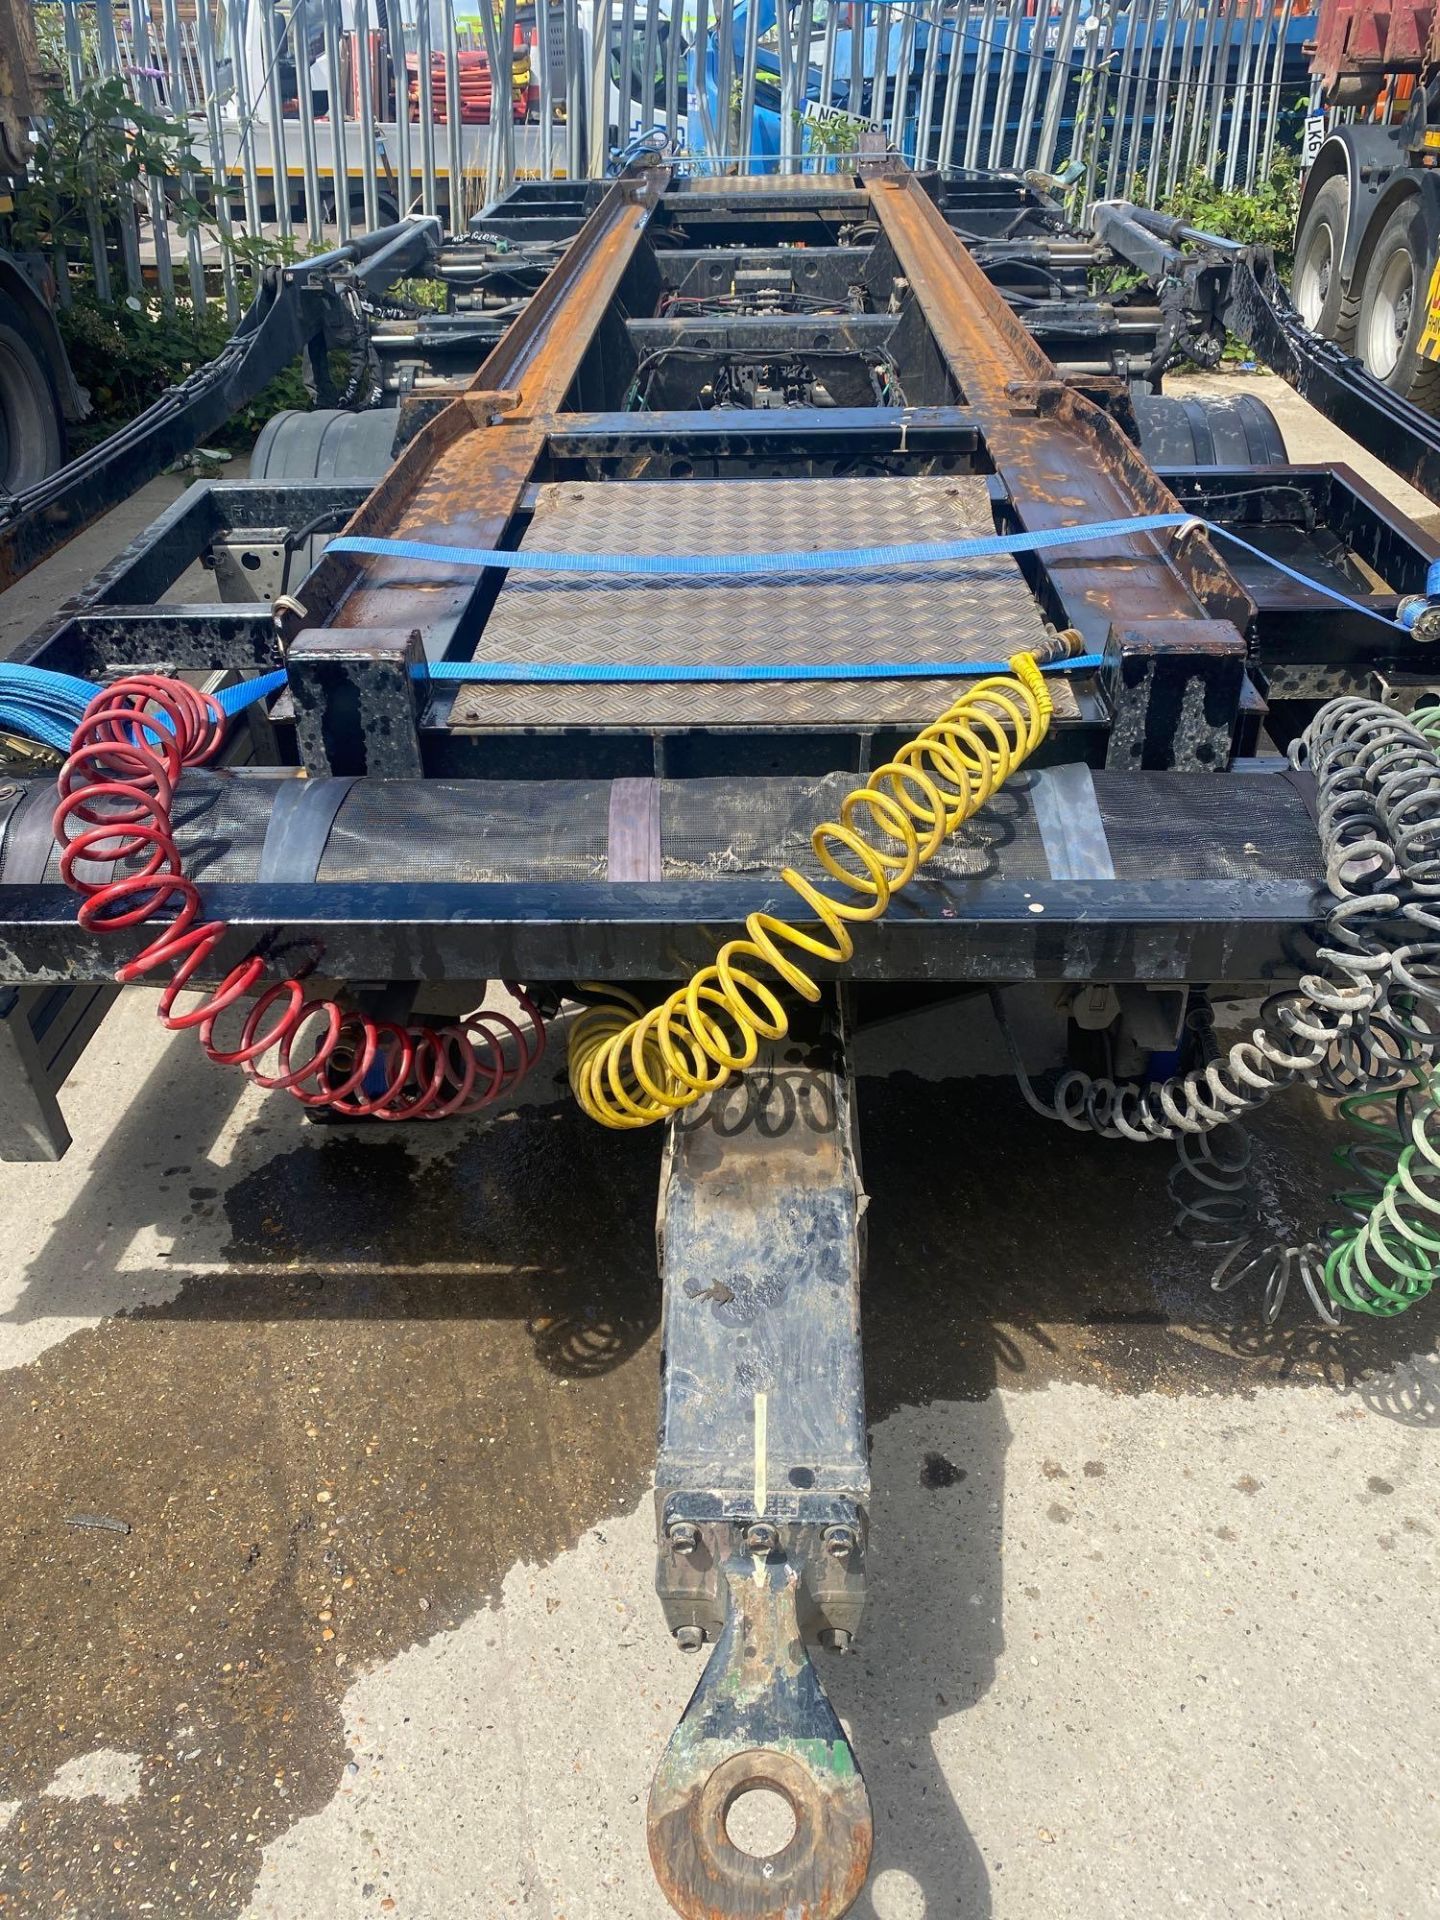 Reload Systems Ltd hydraulic roll-on roll-off tri-axle trailer (2019) - Image 6 of 7